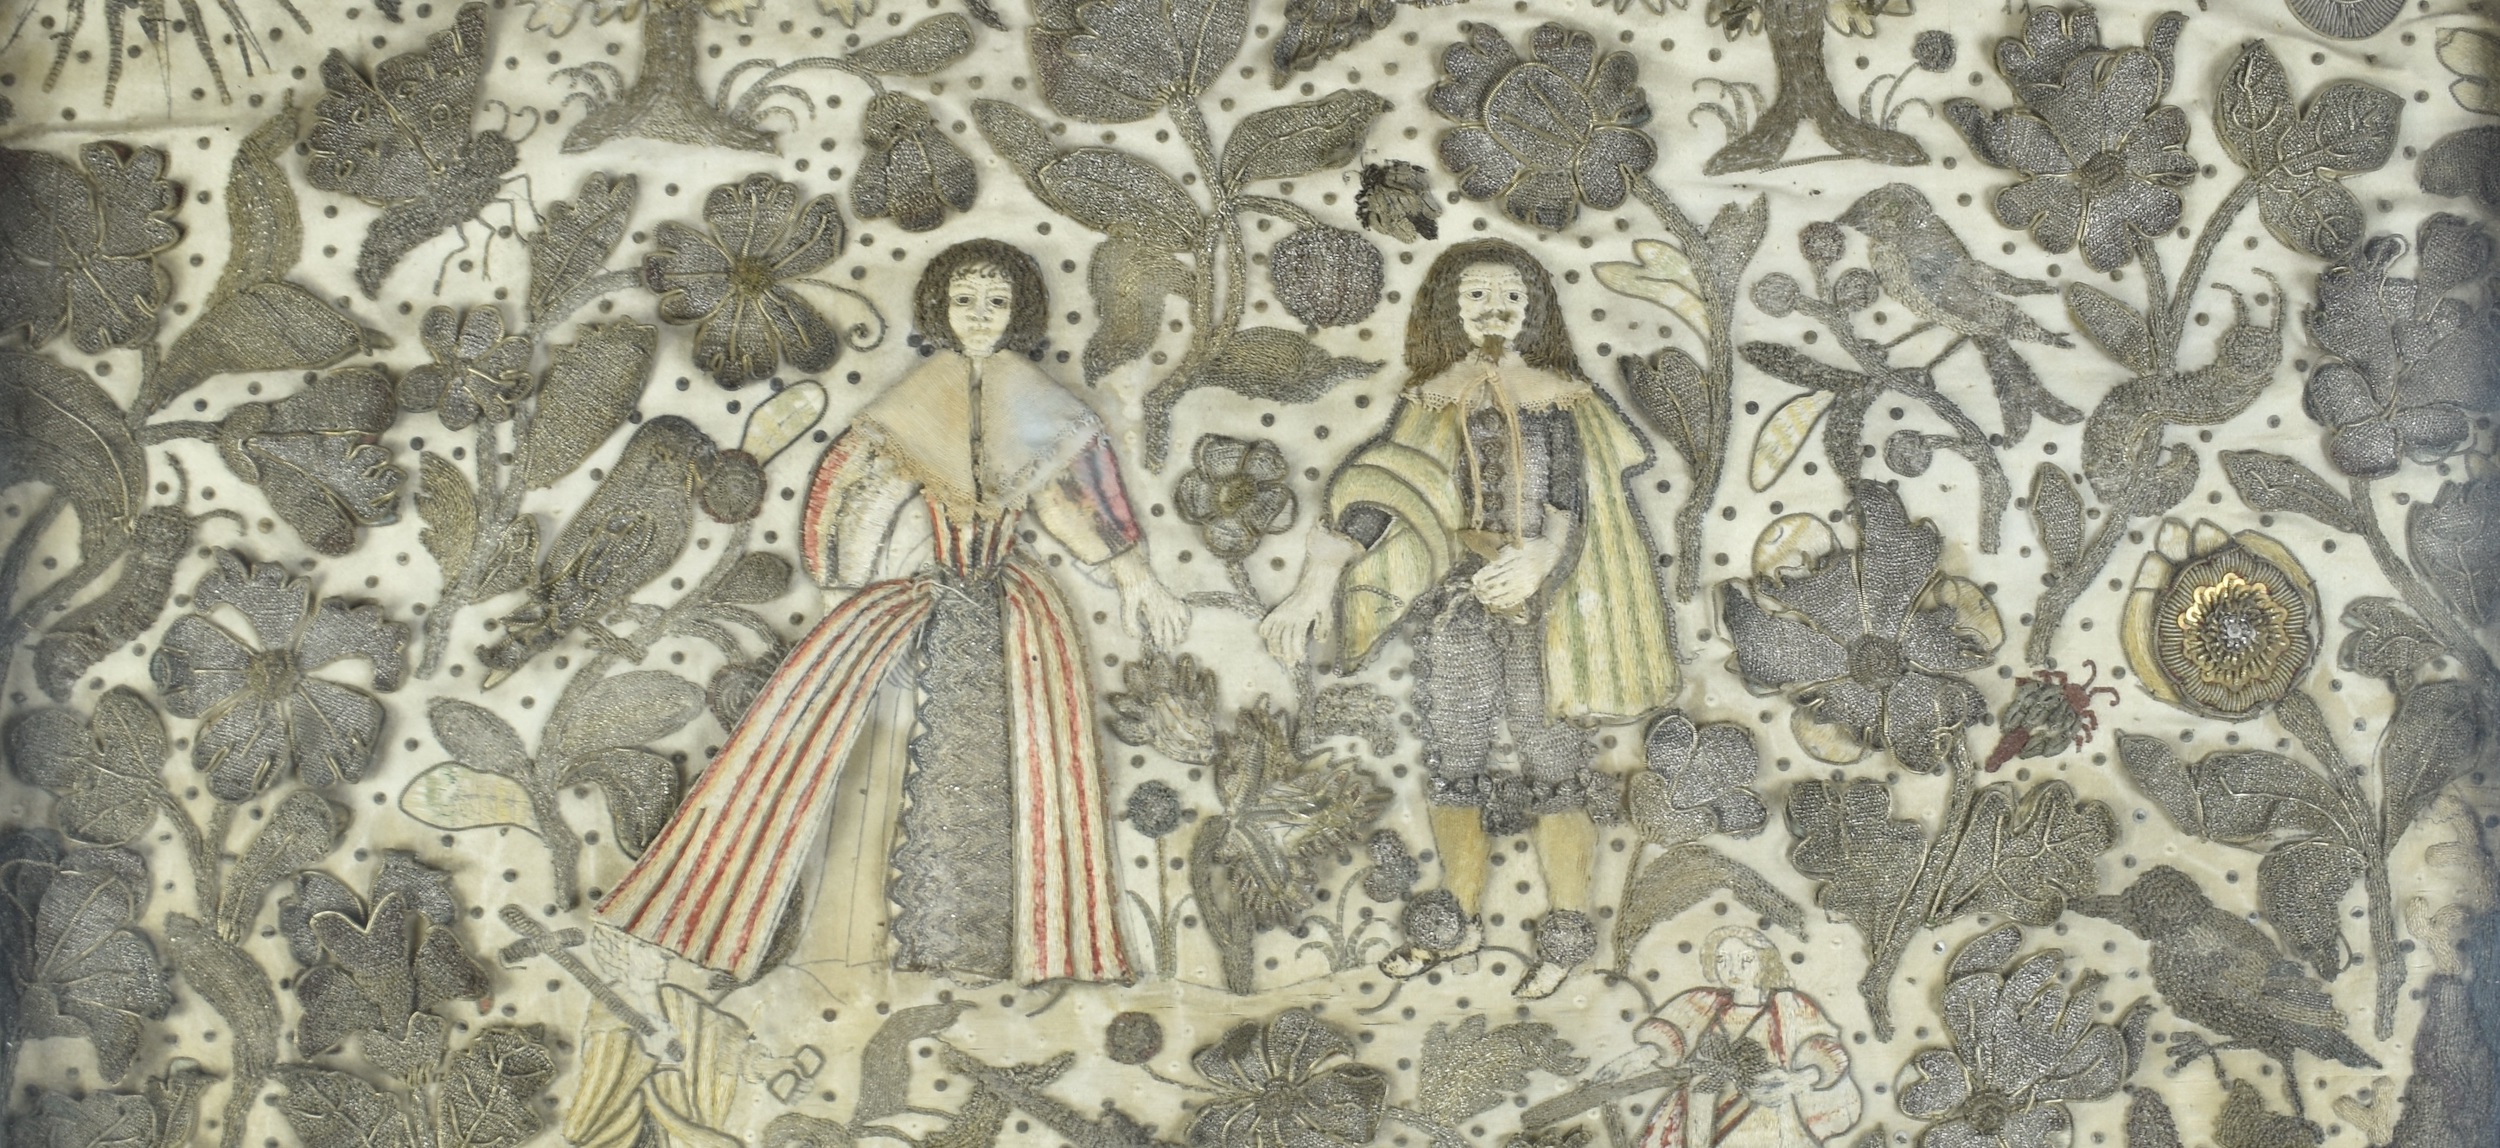 Embroidered clothing with man & woman with floral pattern